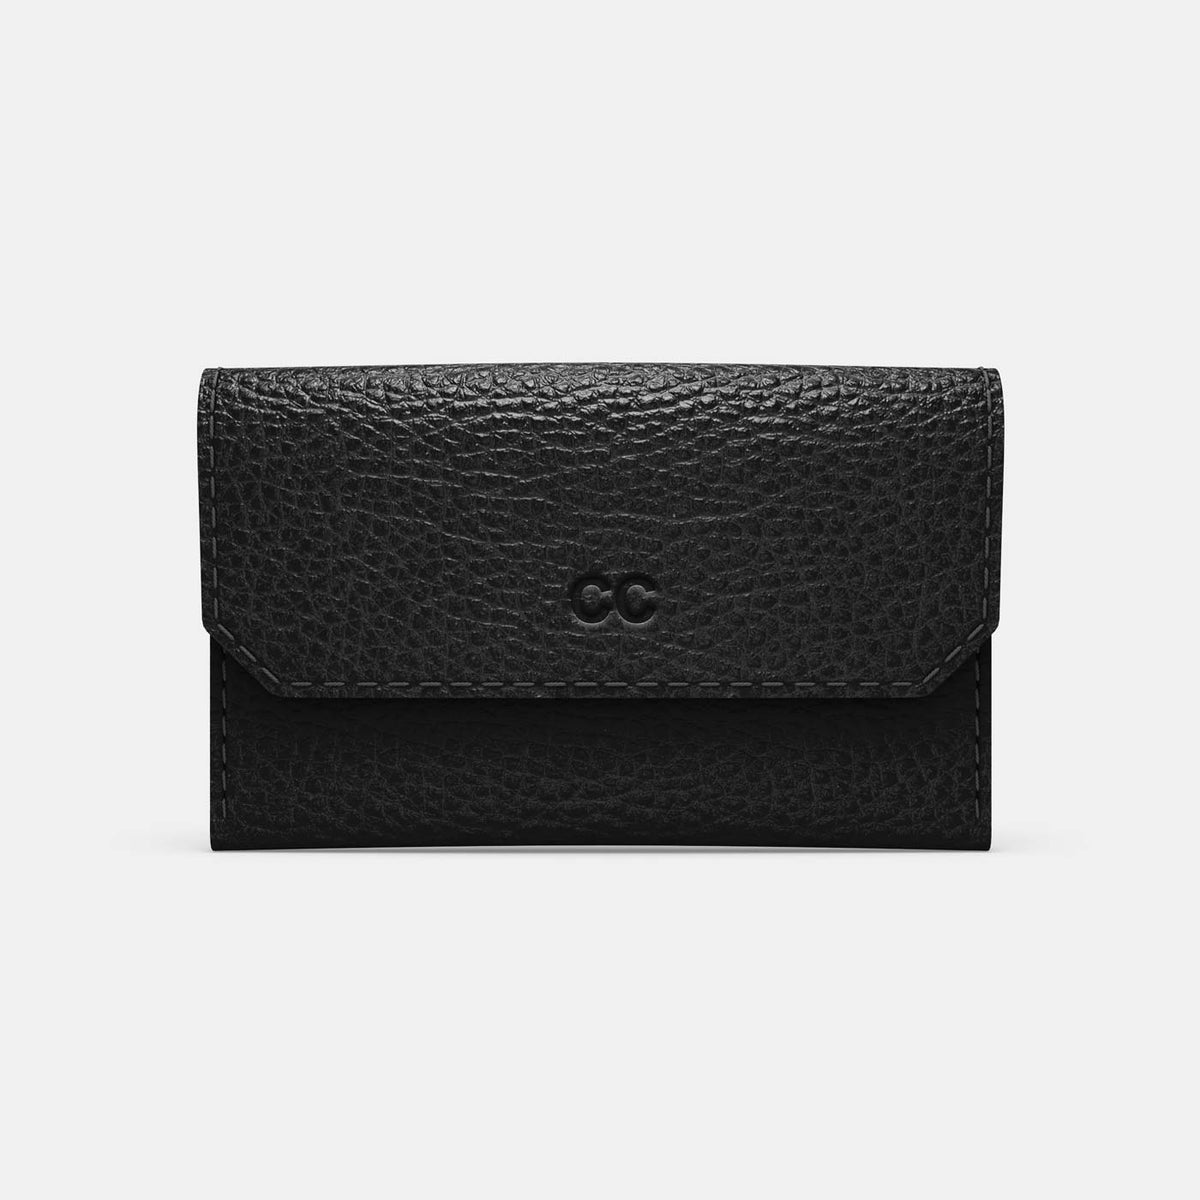 Leather Carry-all Wallet - Black and Black - RYAN London